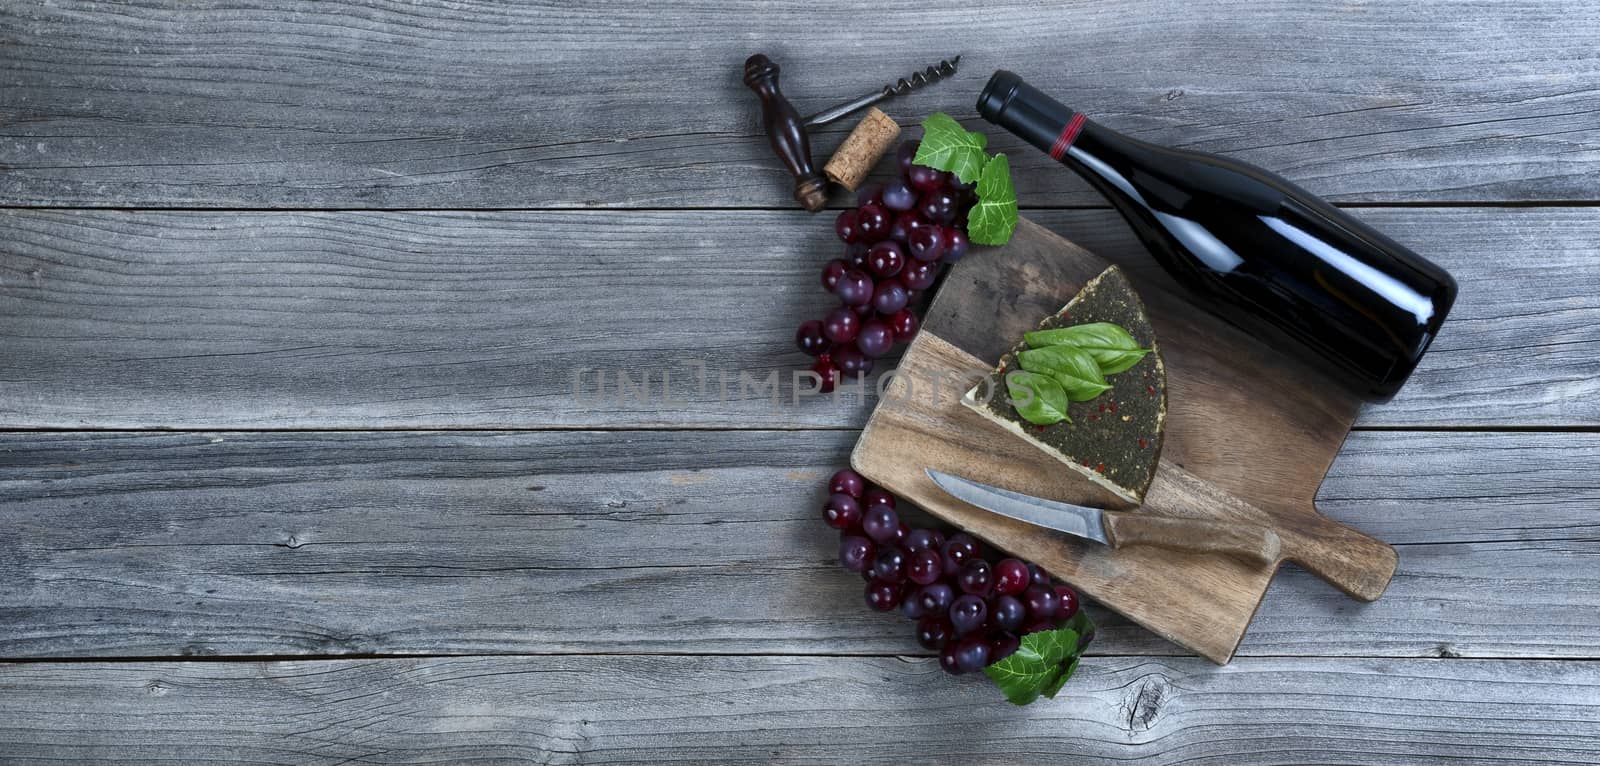 Fresh cheese wedge with a bottle of red wine plus basil leaves and grapes on rustic wood with copy space available 